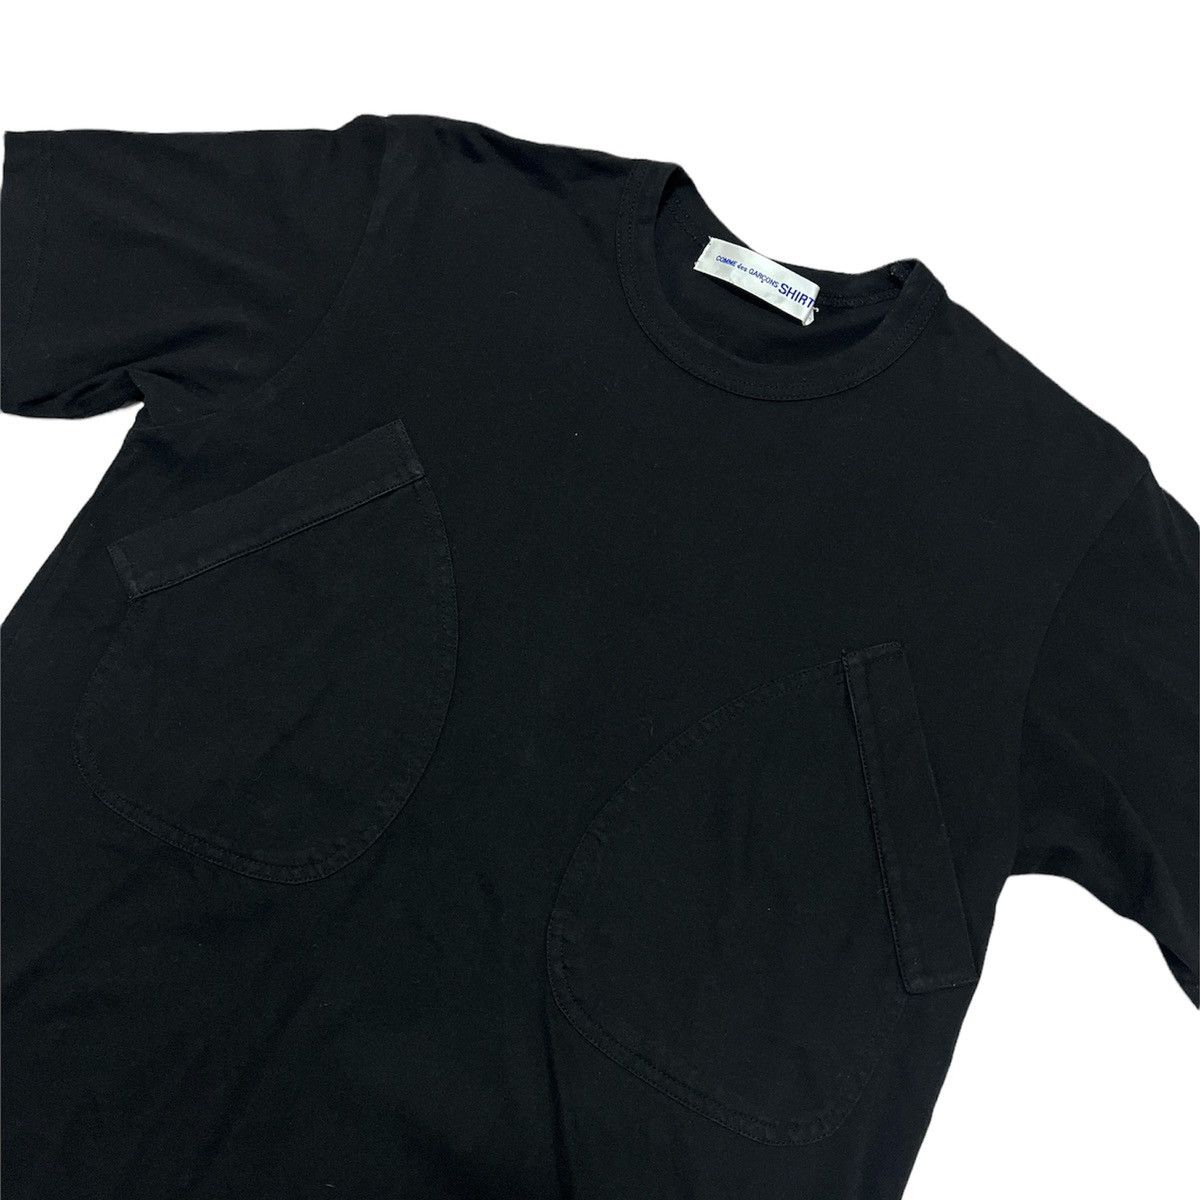 Comme des Garcons Shirt Double Picket Tee - 2